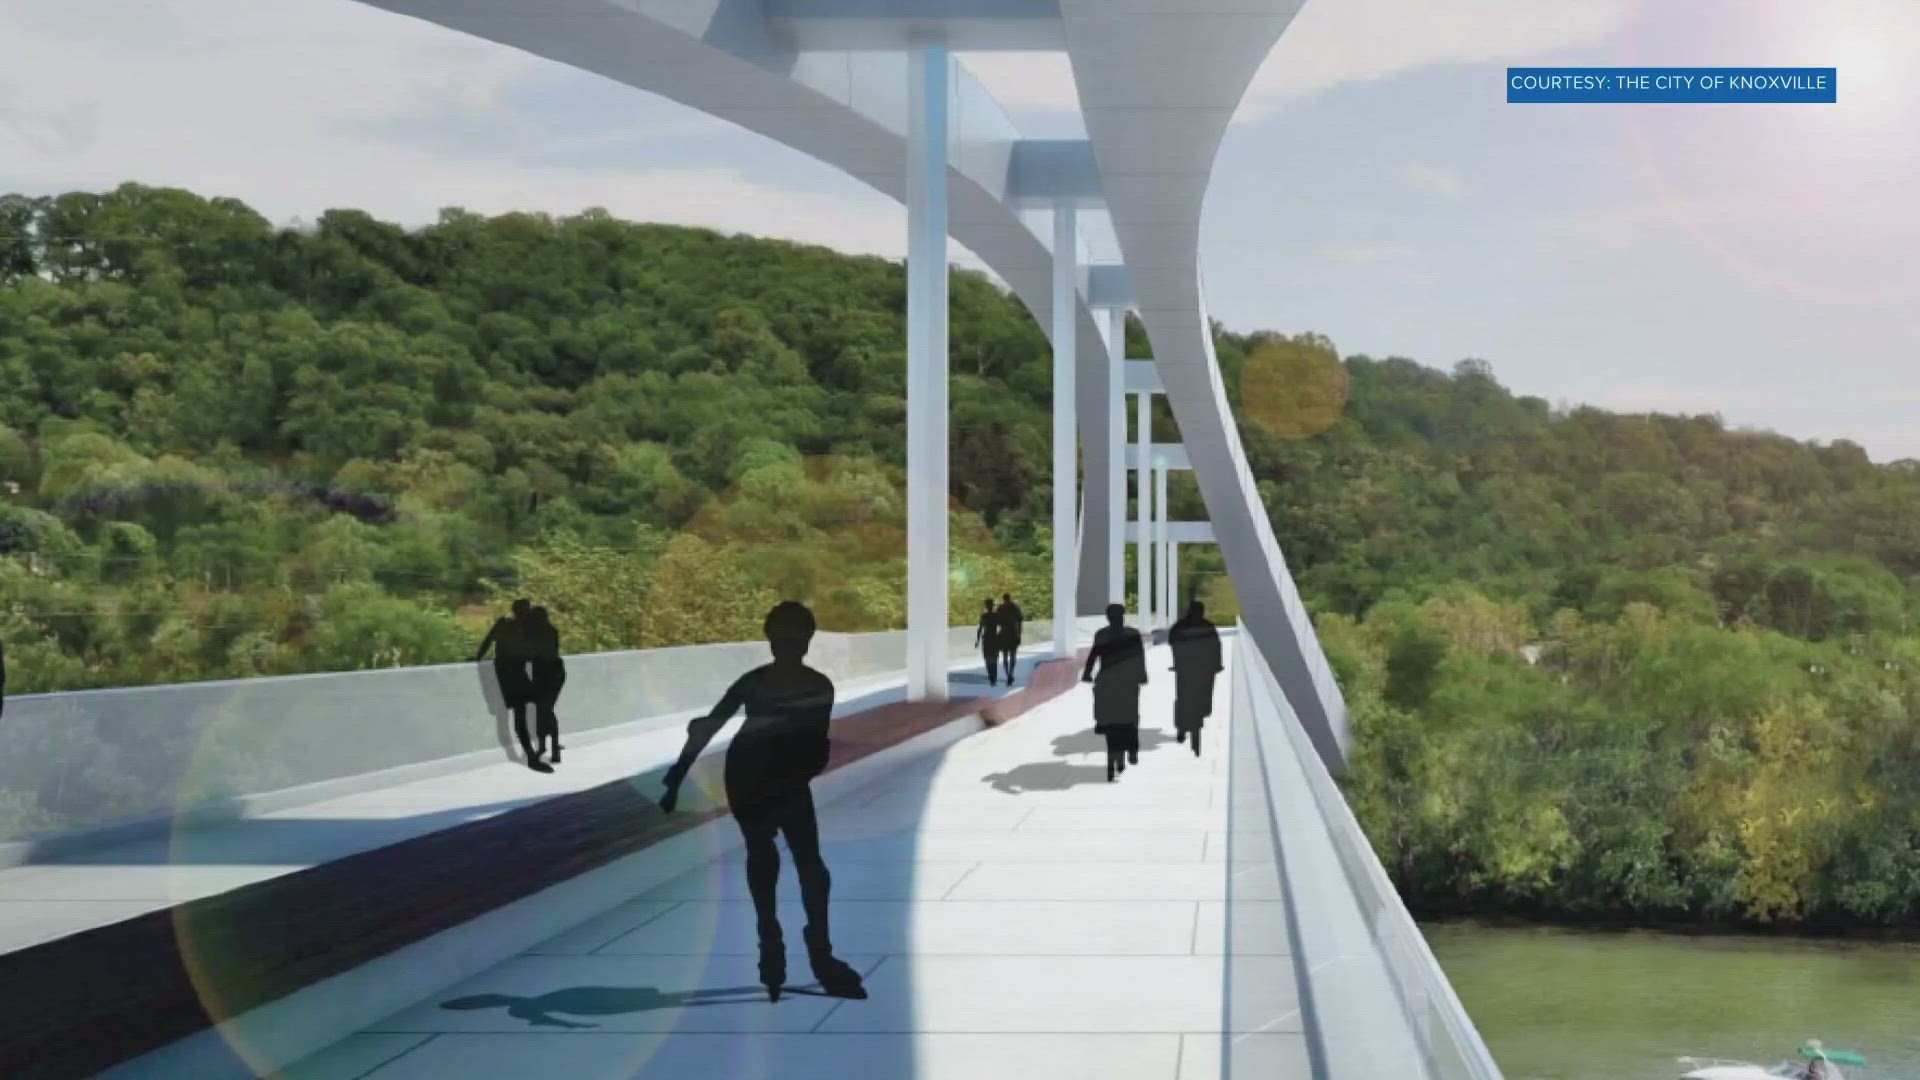 The proposal was part of a presentation on the state's budget and showed a plan to spend $20 million for the bridge from the state's general fund.